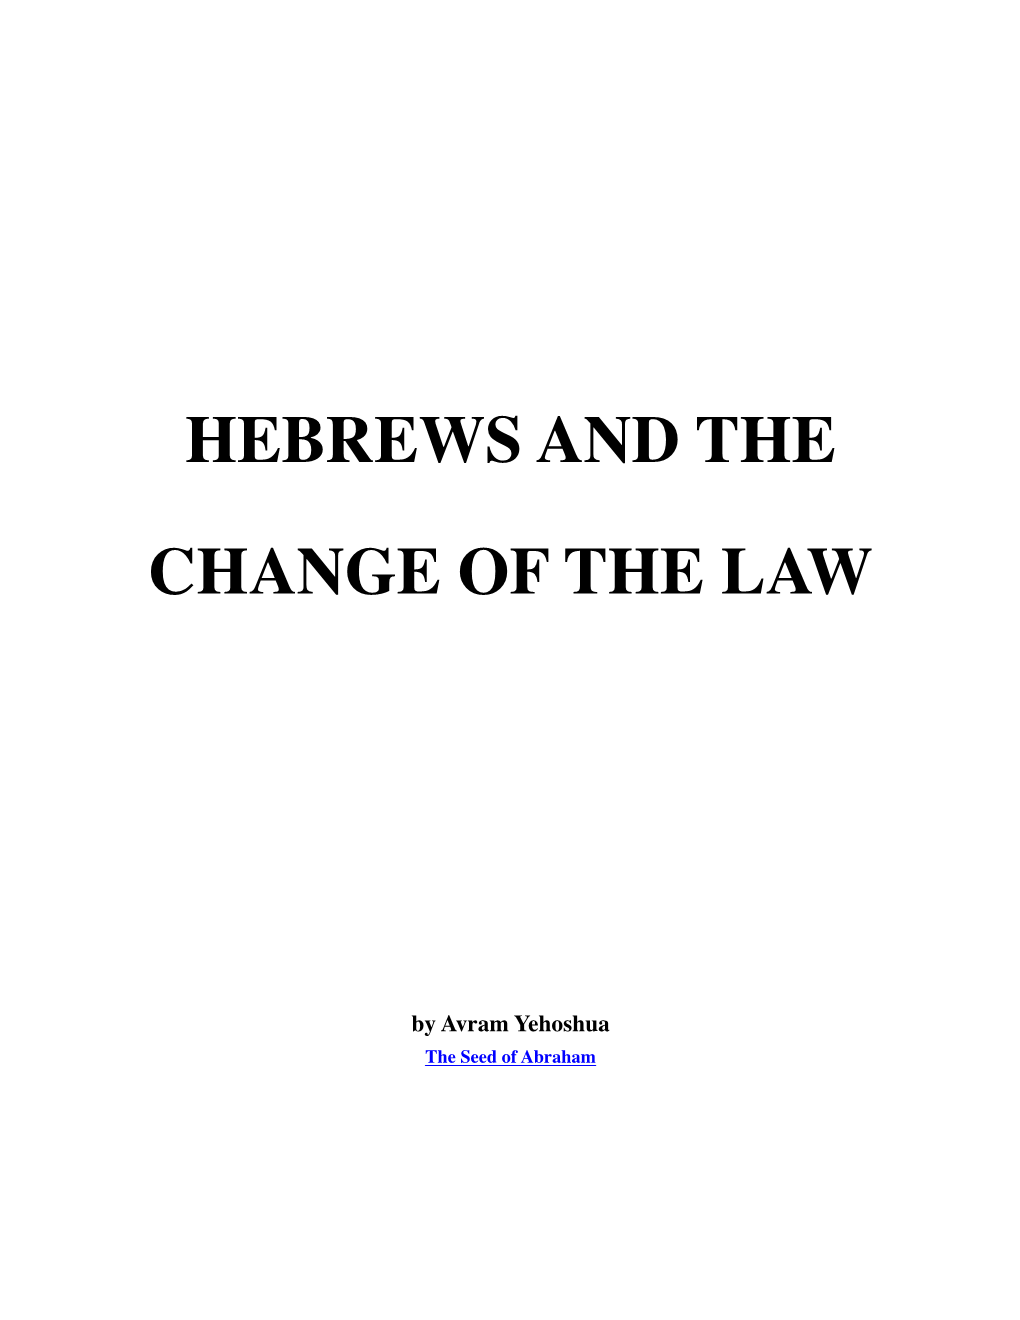 Hebrews and the Change of the Law